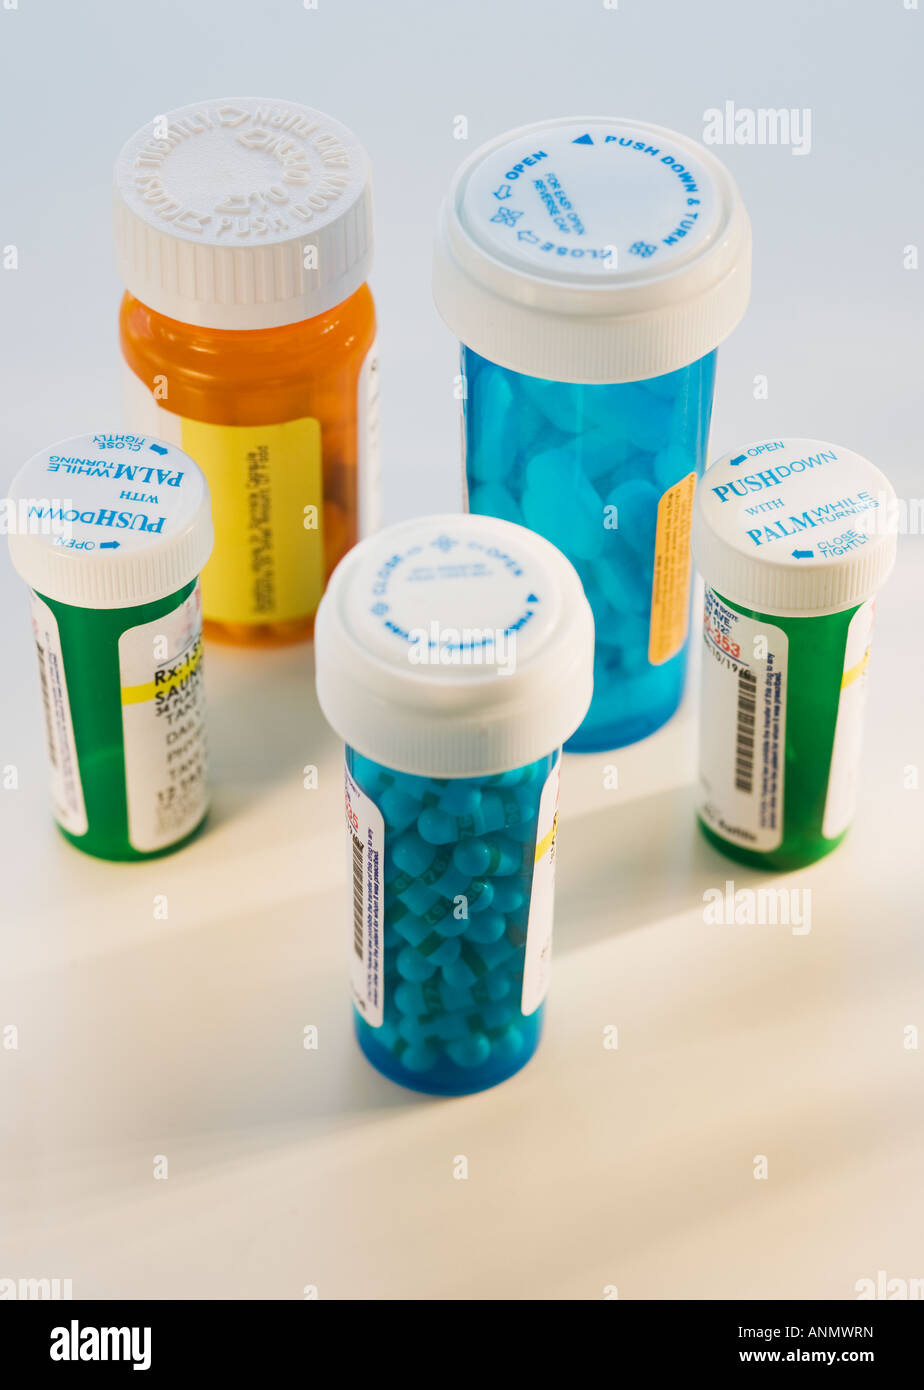 Medication Pharmacy Child Proof Container Stock Photo - Image of  medication, container: 112943206